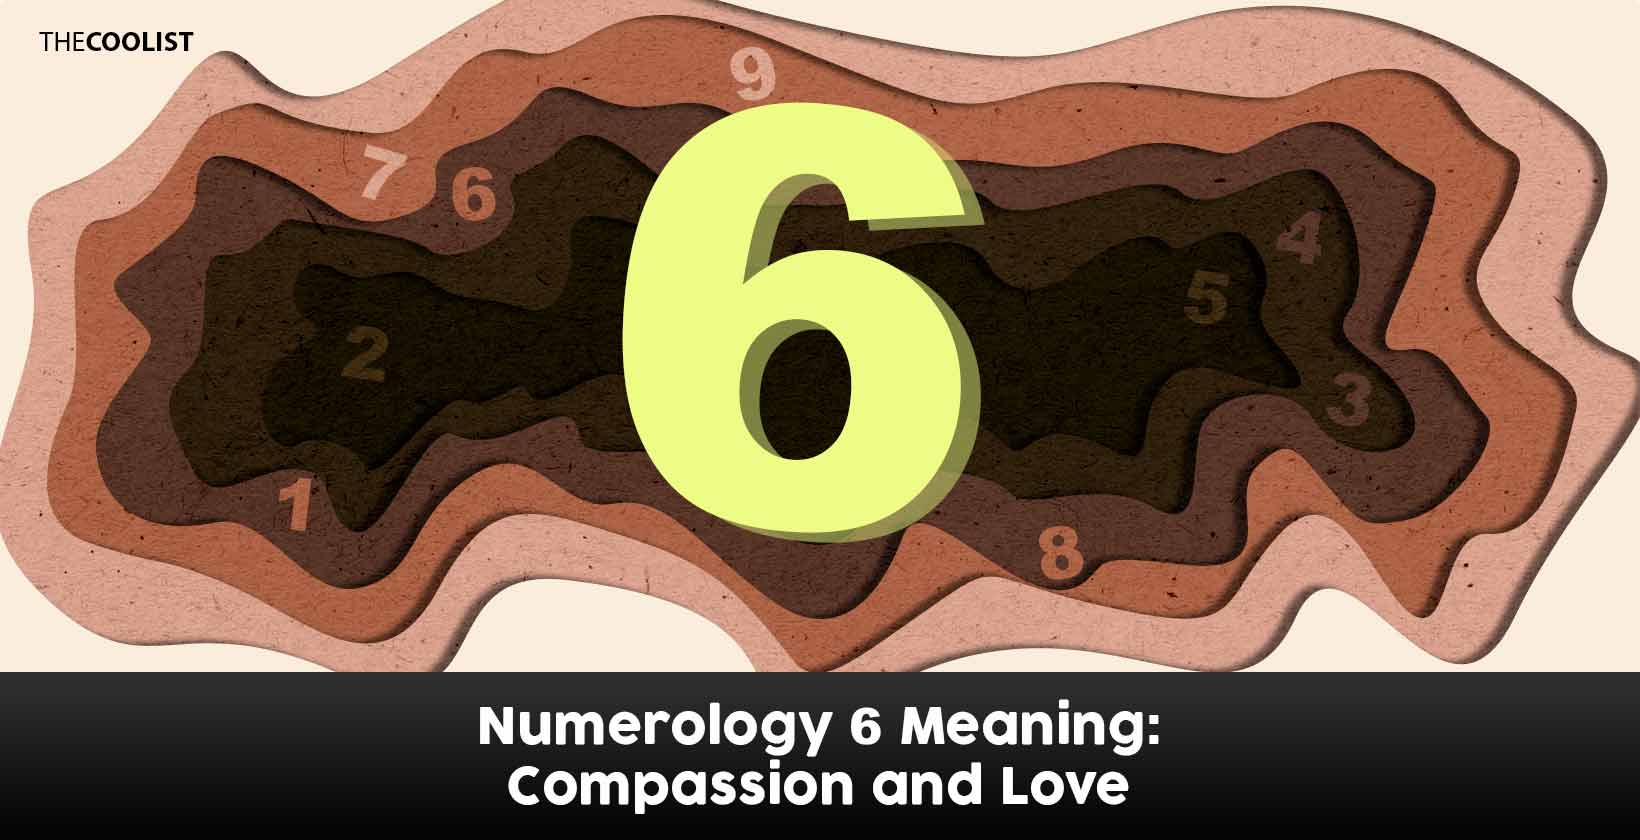 Numerology 6 Meaning: Compassion and Love